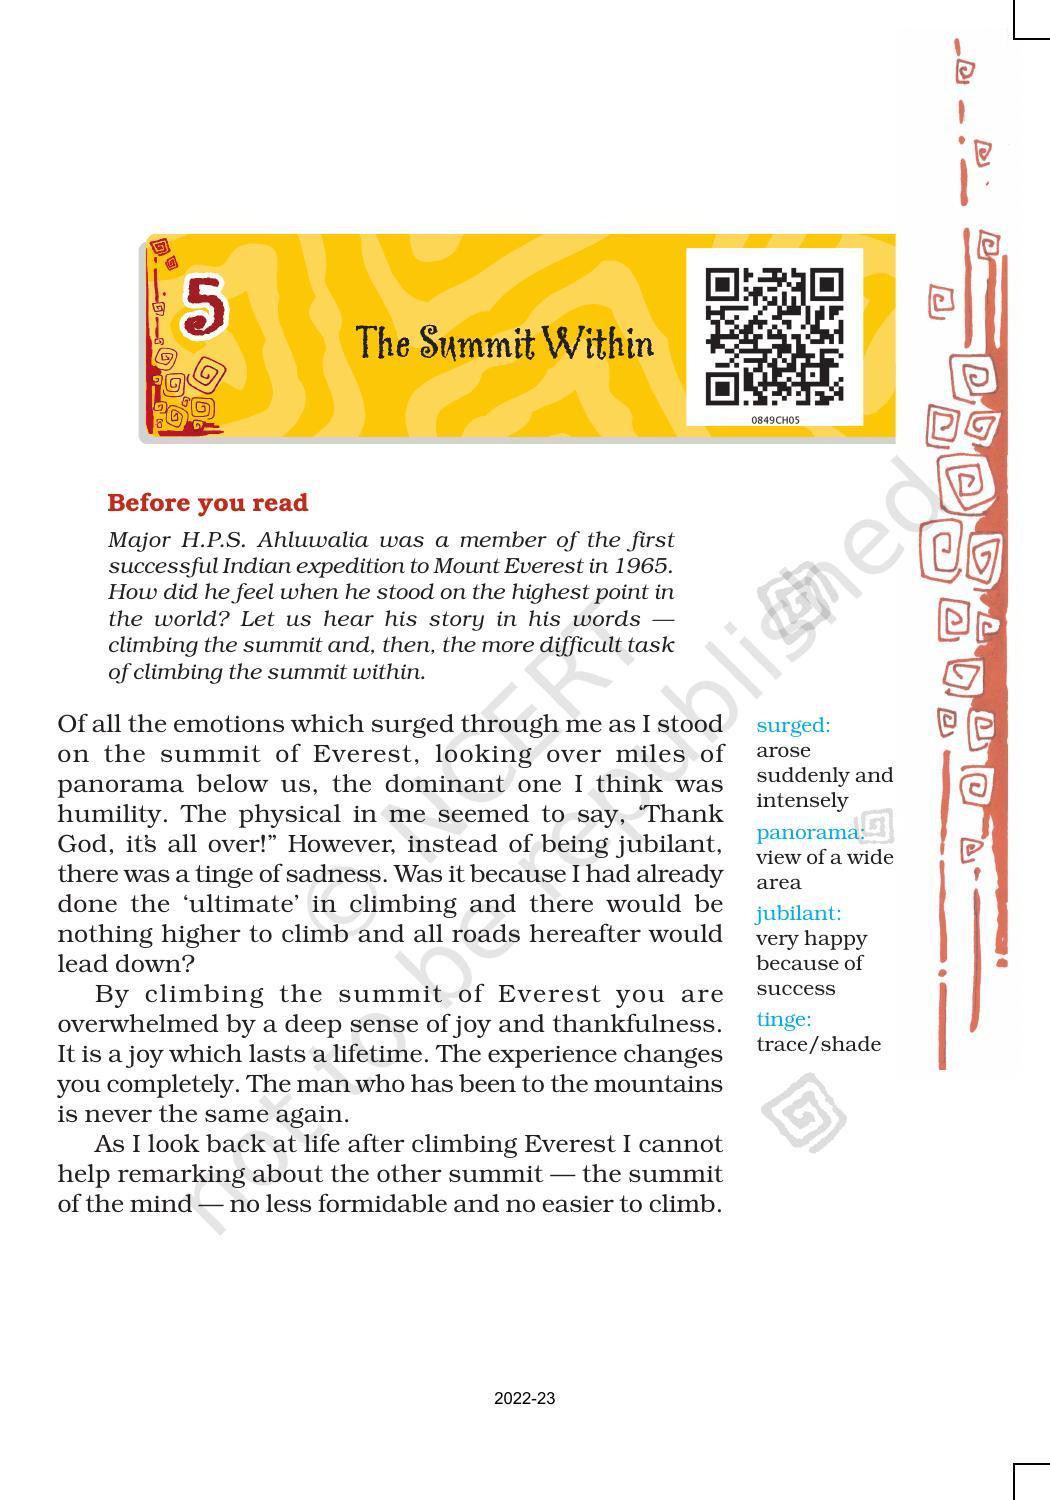 NCERT Book for Class 8 English Chapter 5 The Summit Within - Page 1